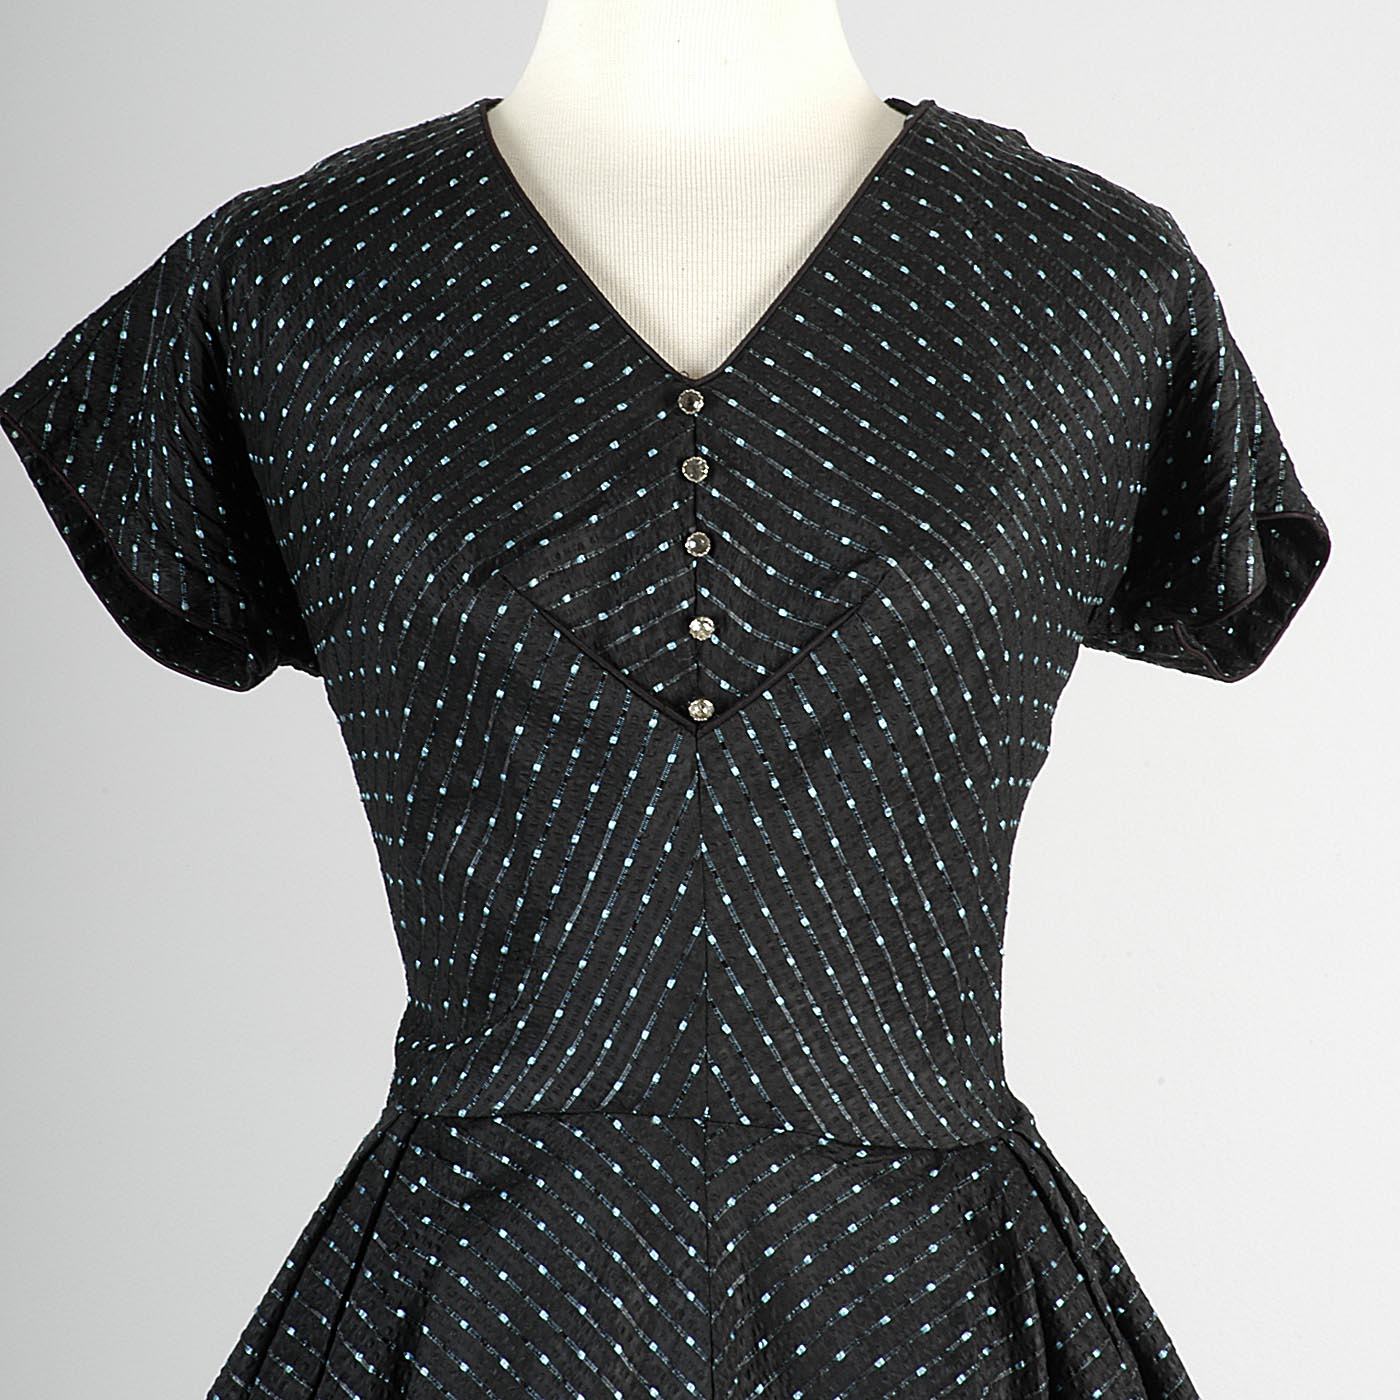 1950s Black Fit and Flare Party Dress